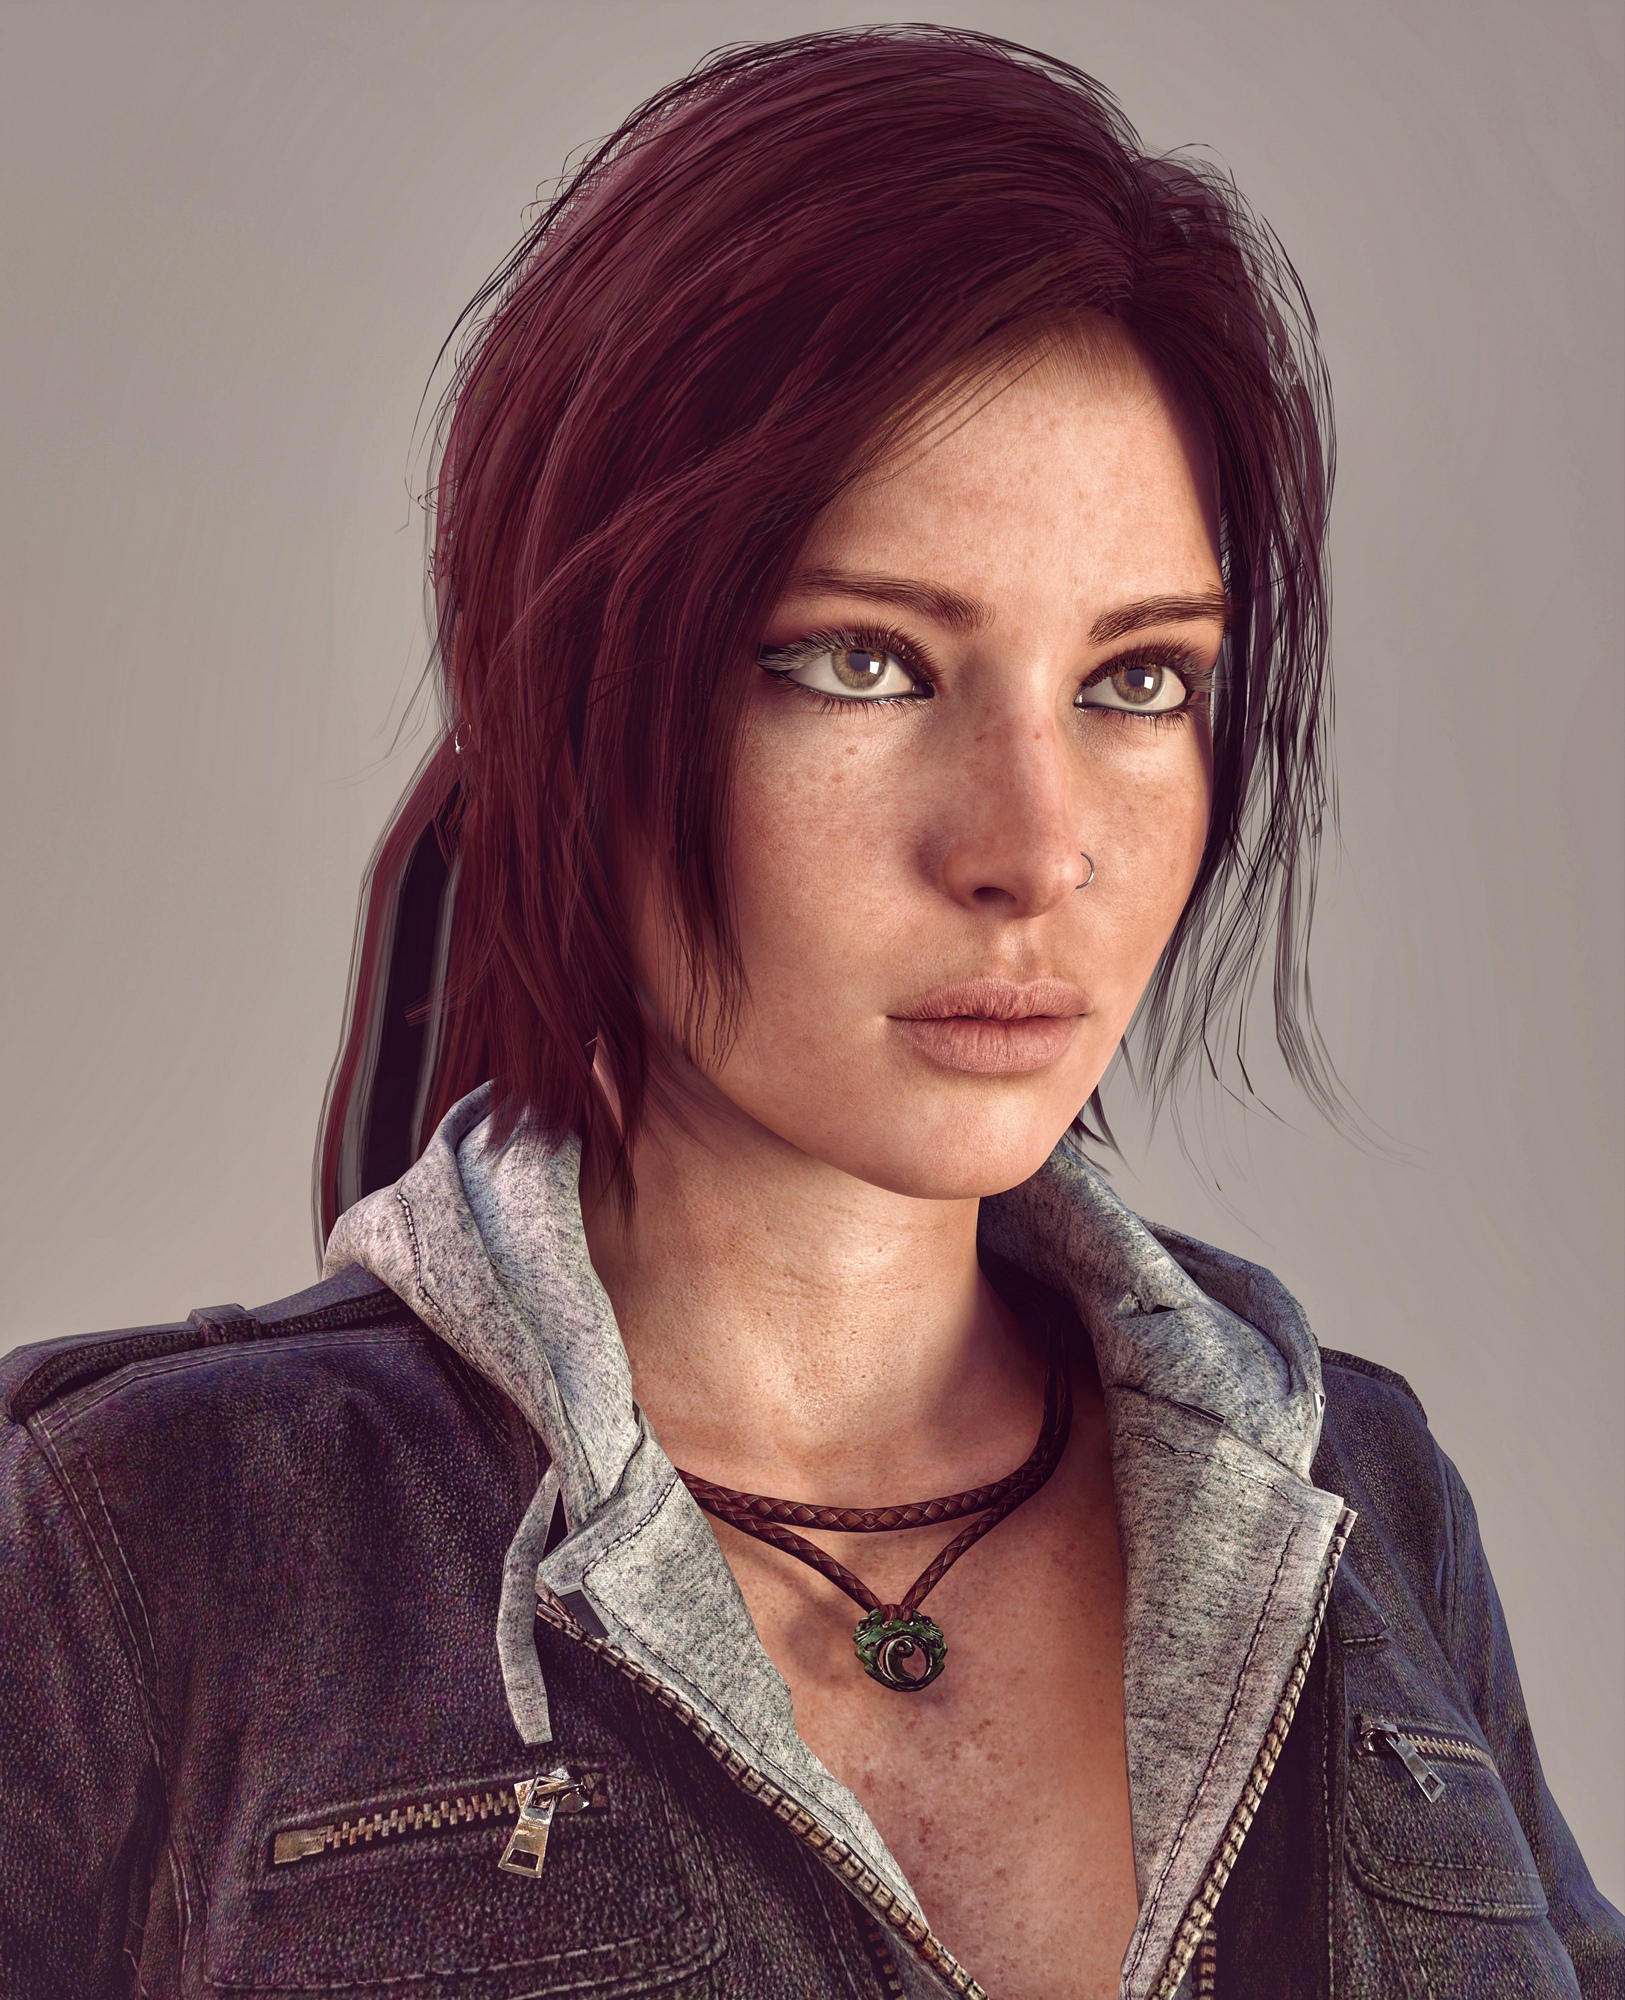 [NOT A GUIDE] The 3Dx artwork of Lara image 14